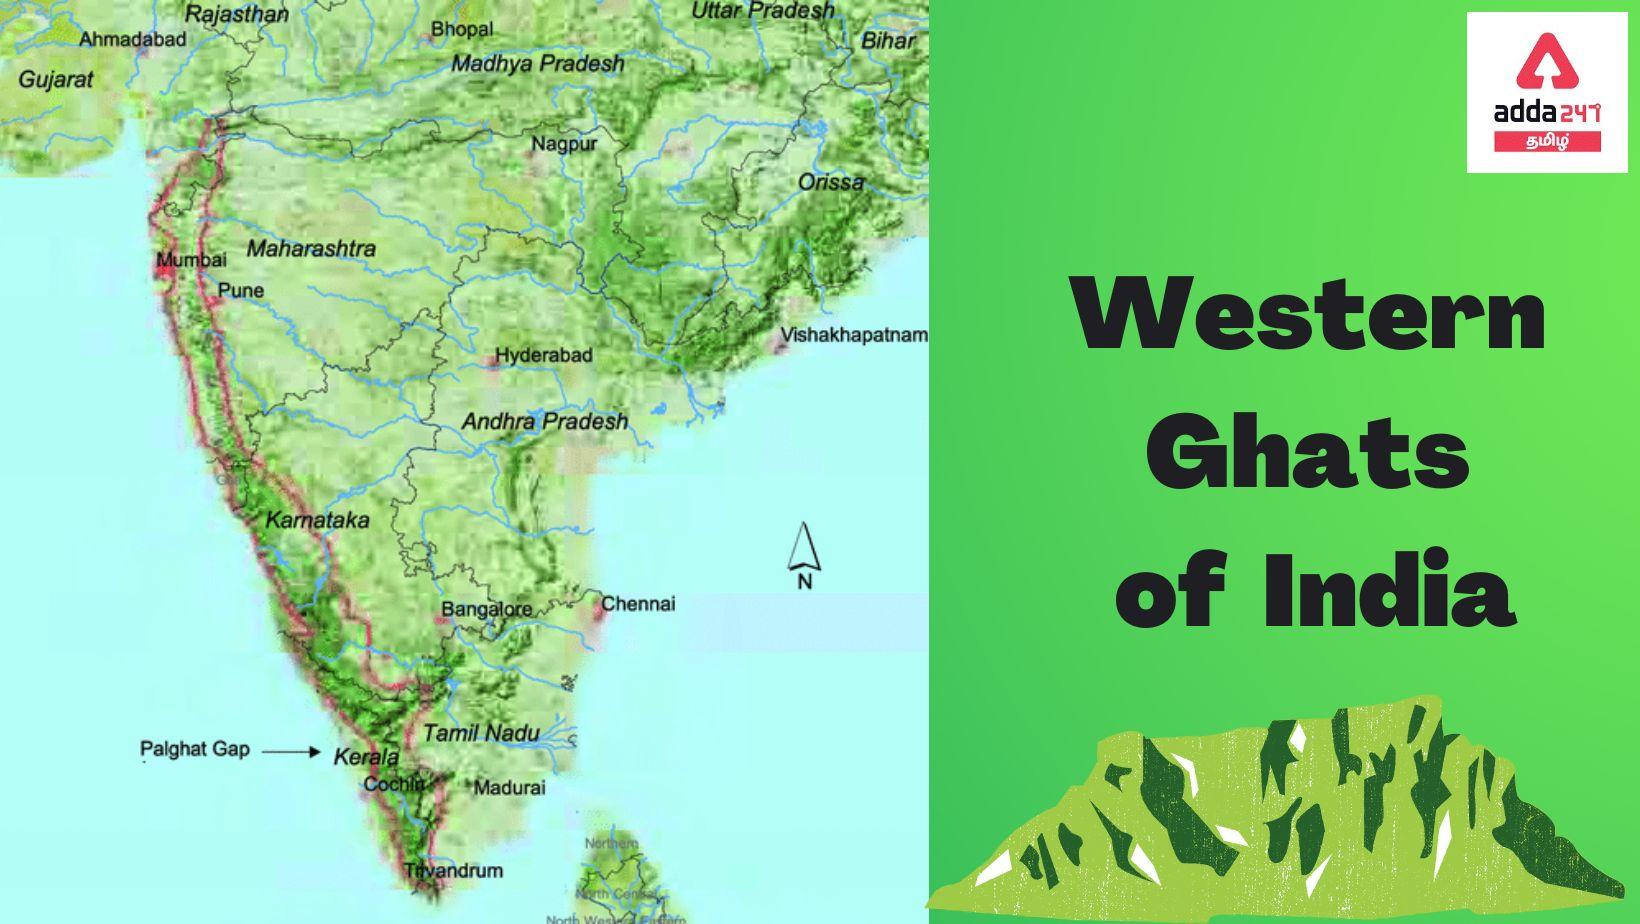 Western Ghats of India